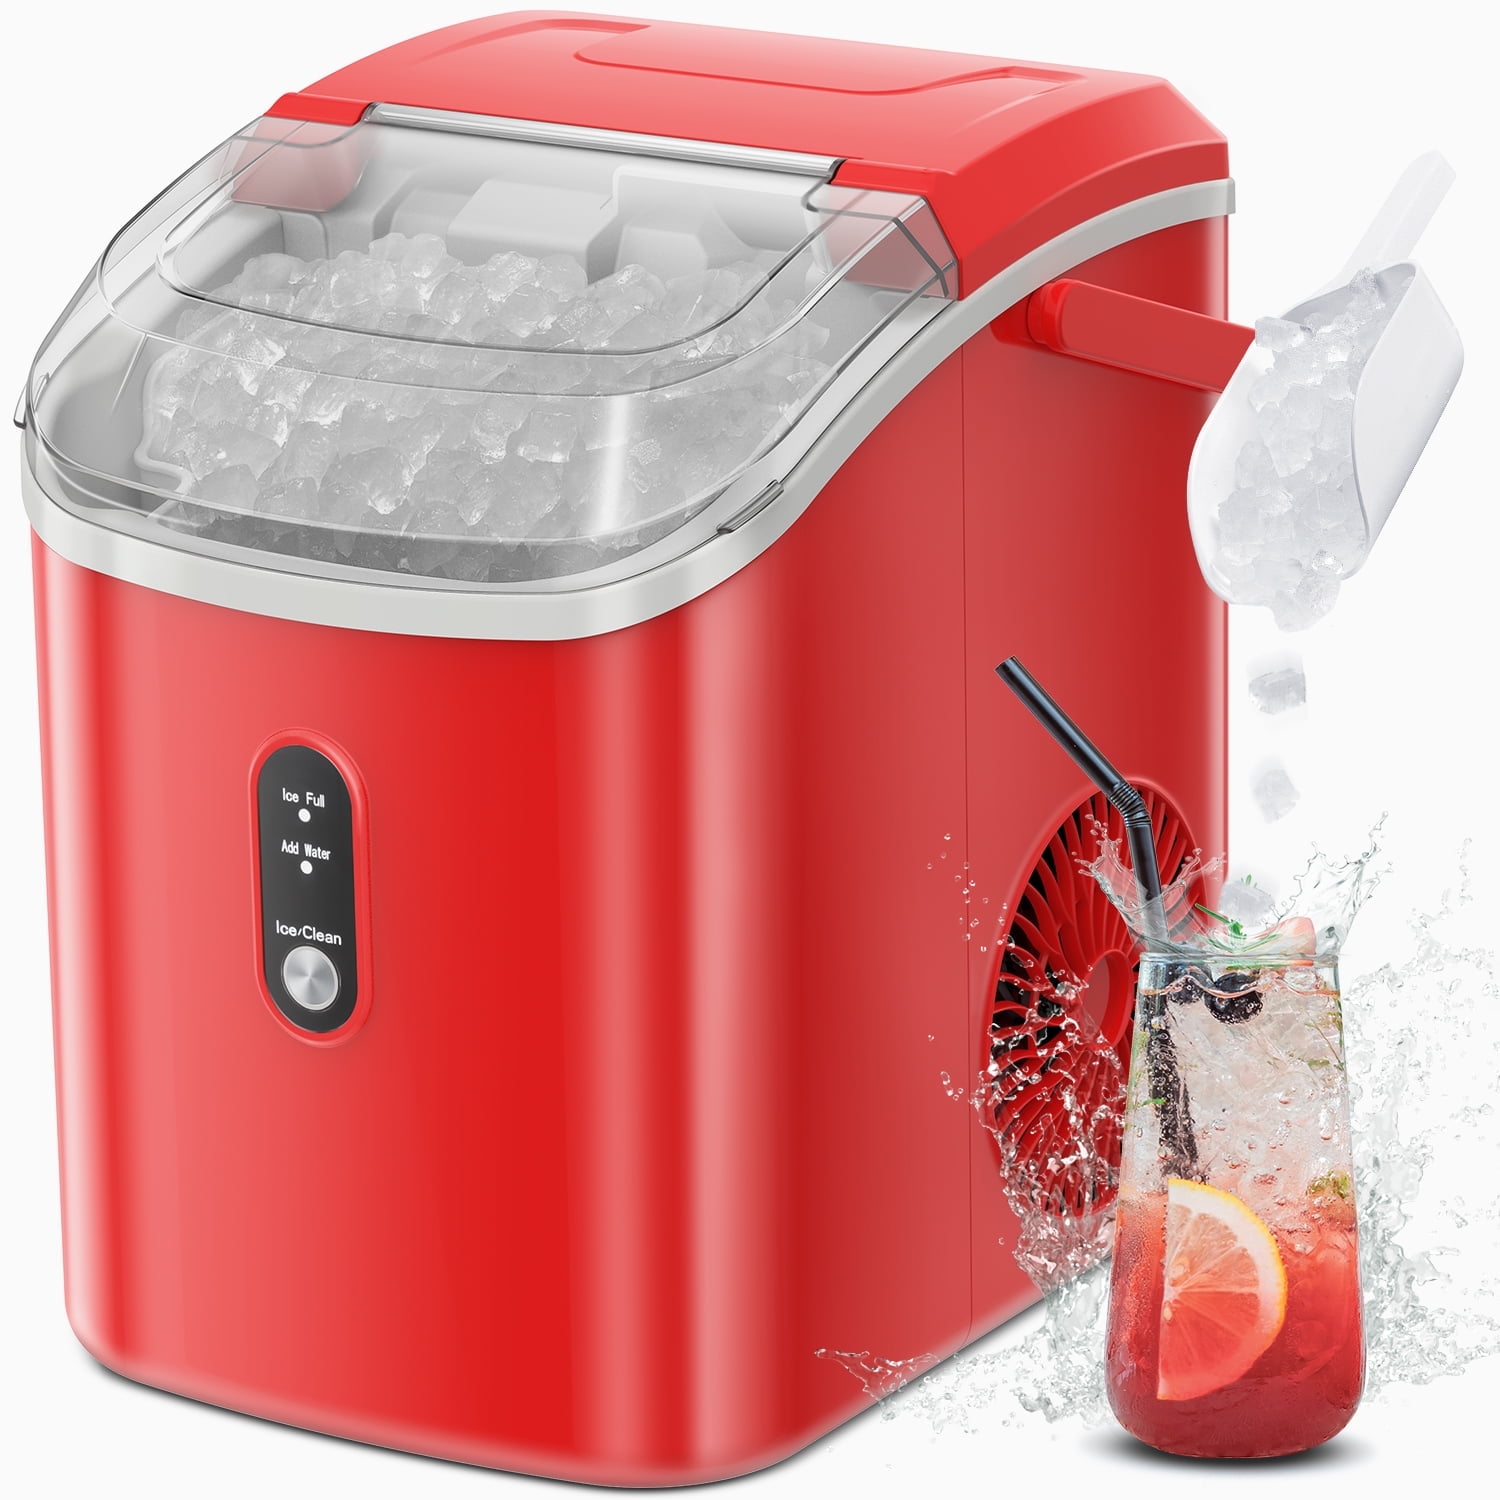 Residential Nugget Ice Machine for Chewable Ice at Home- omg!!!! I need  this!